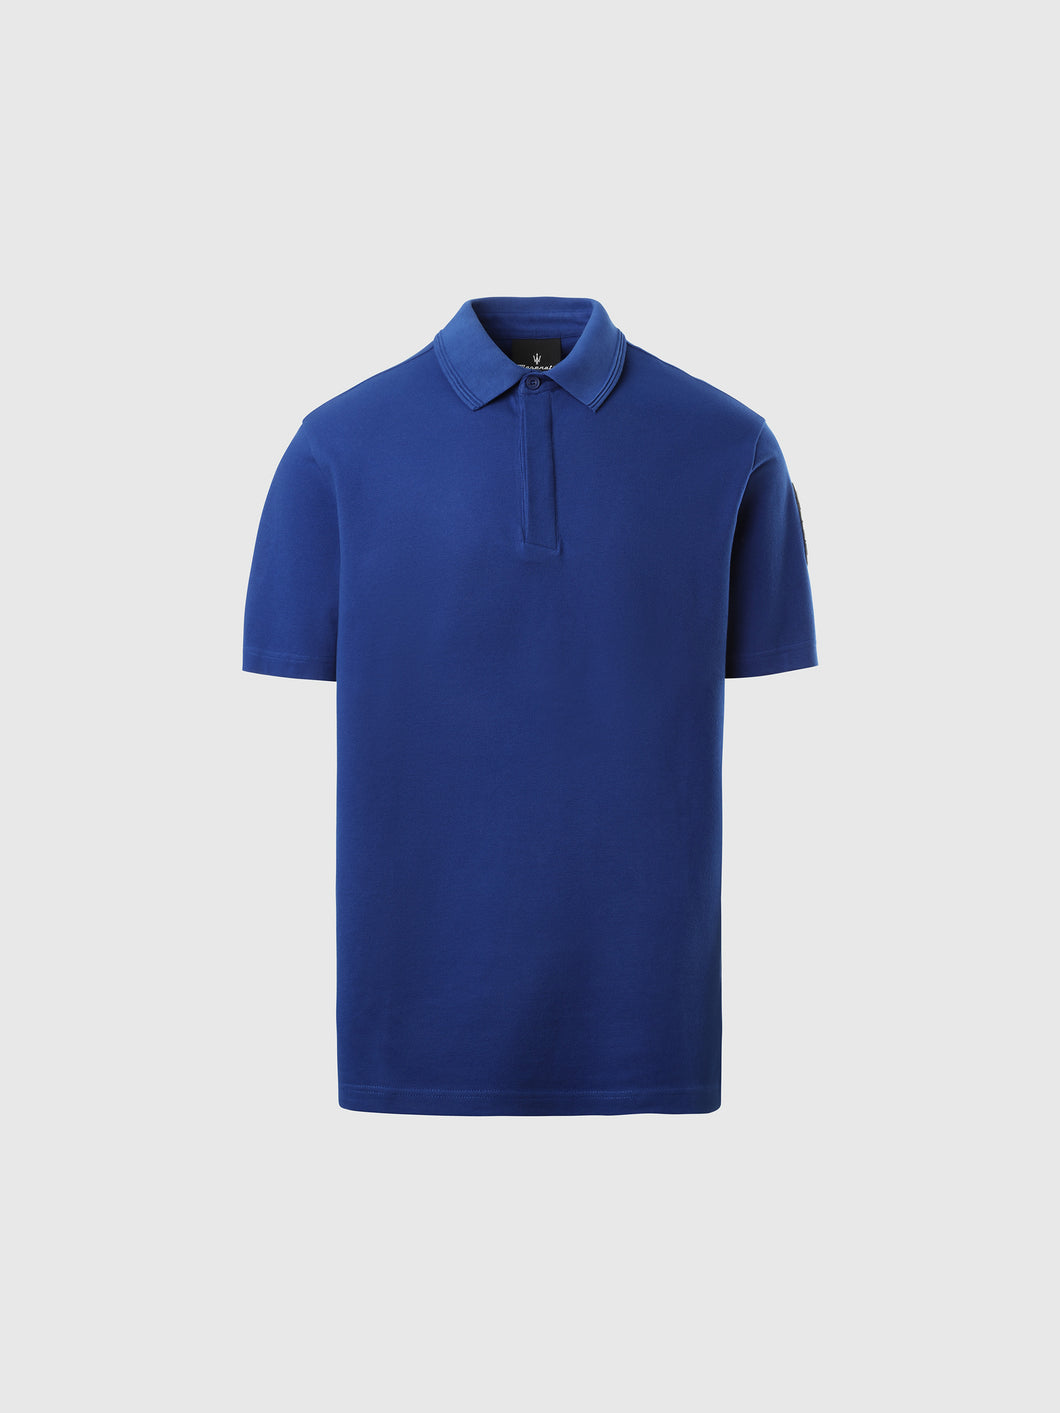 North Sails By Maserati,Electrical Blue  Technical Pique Polo Shirt